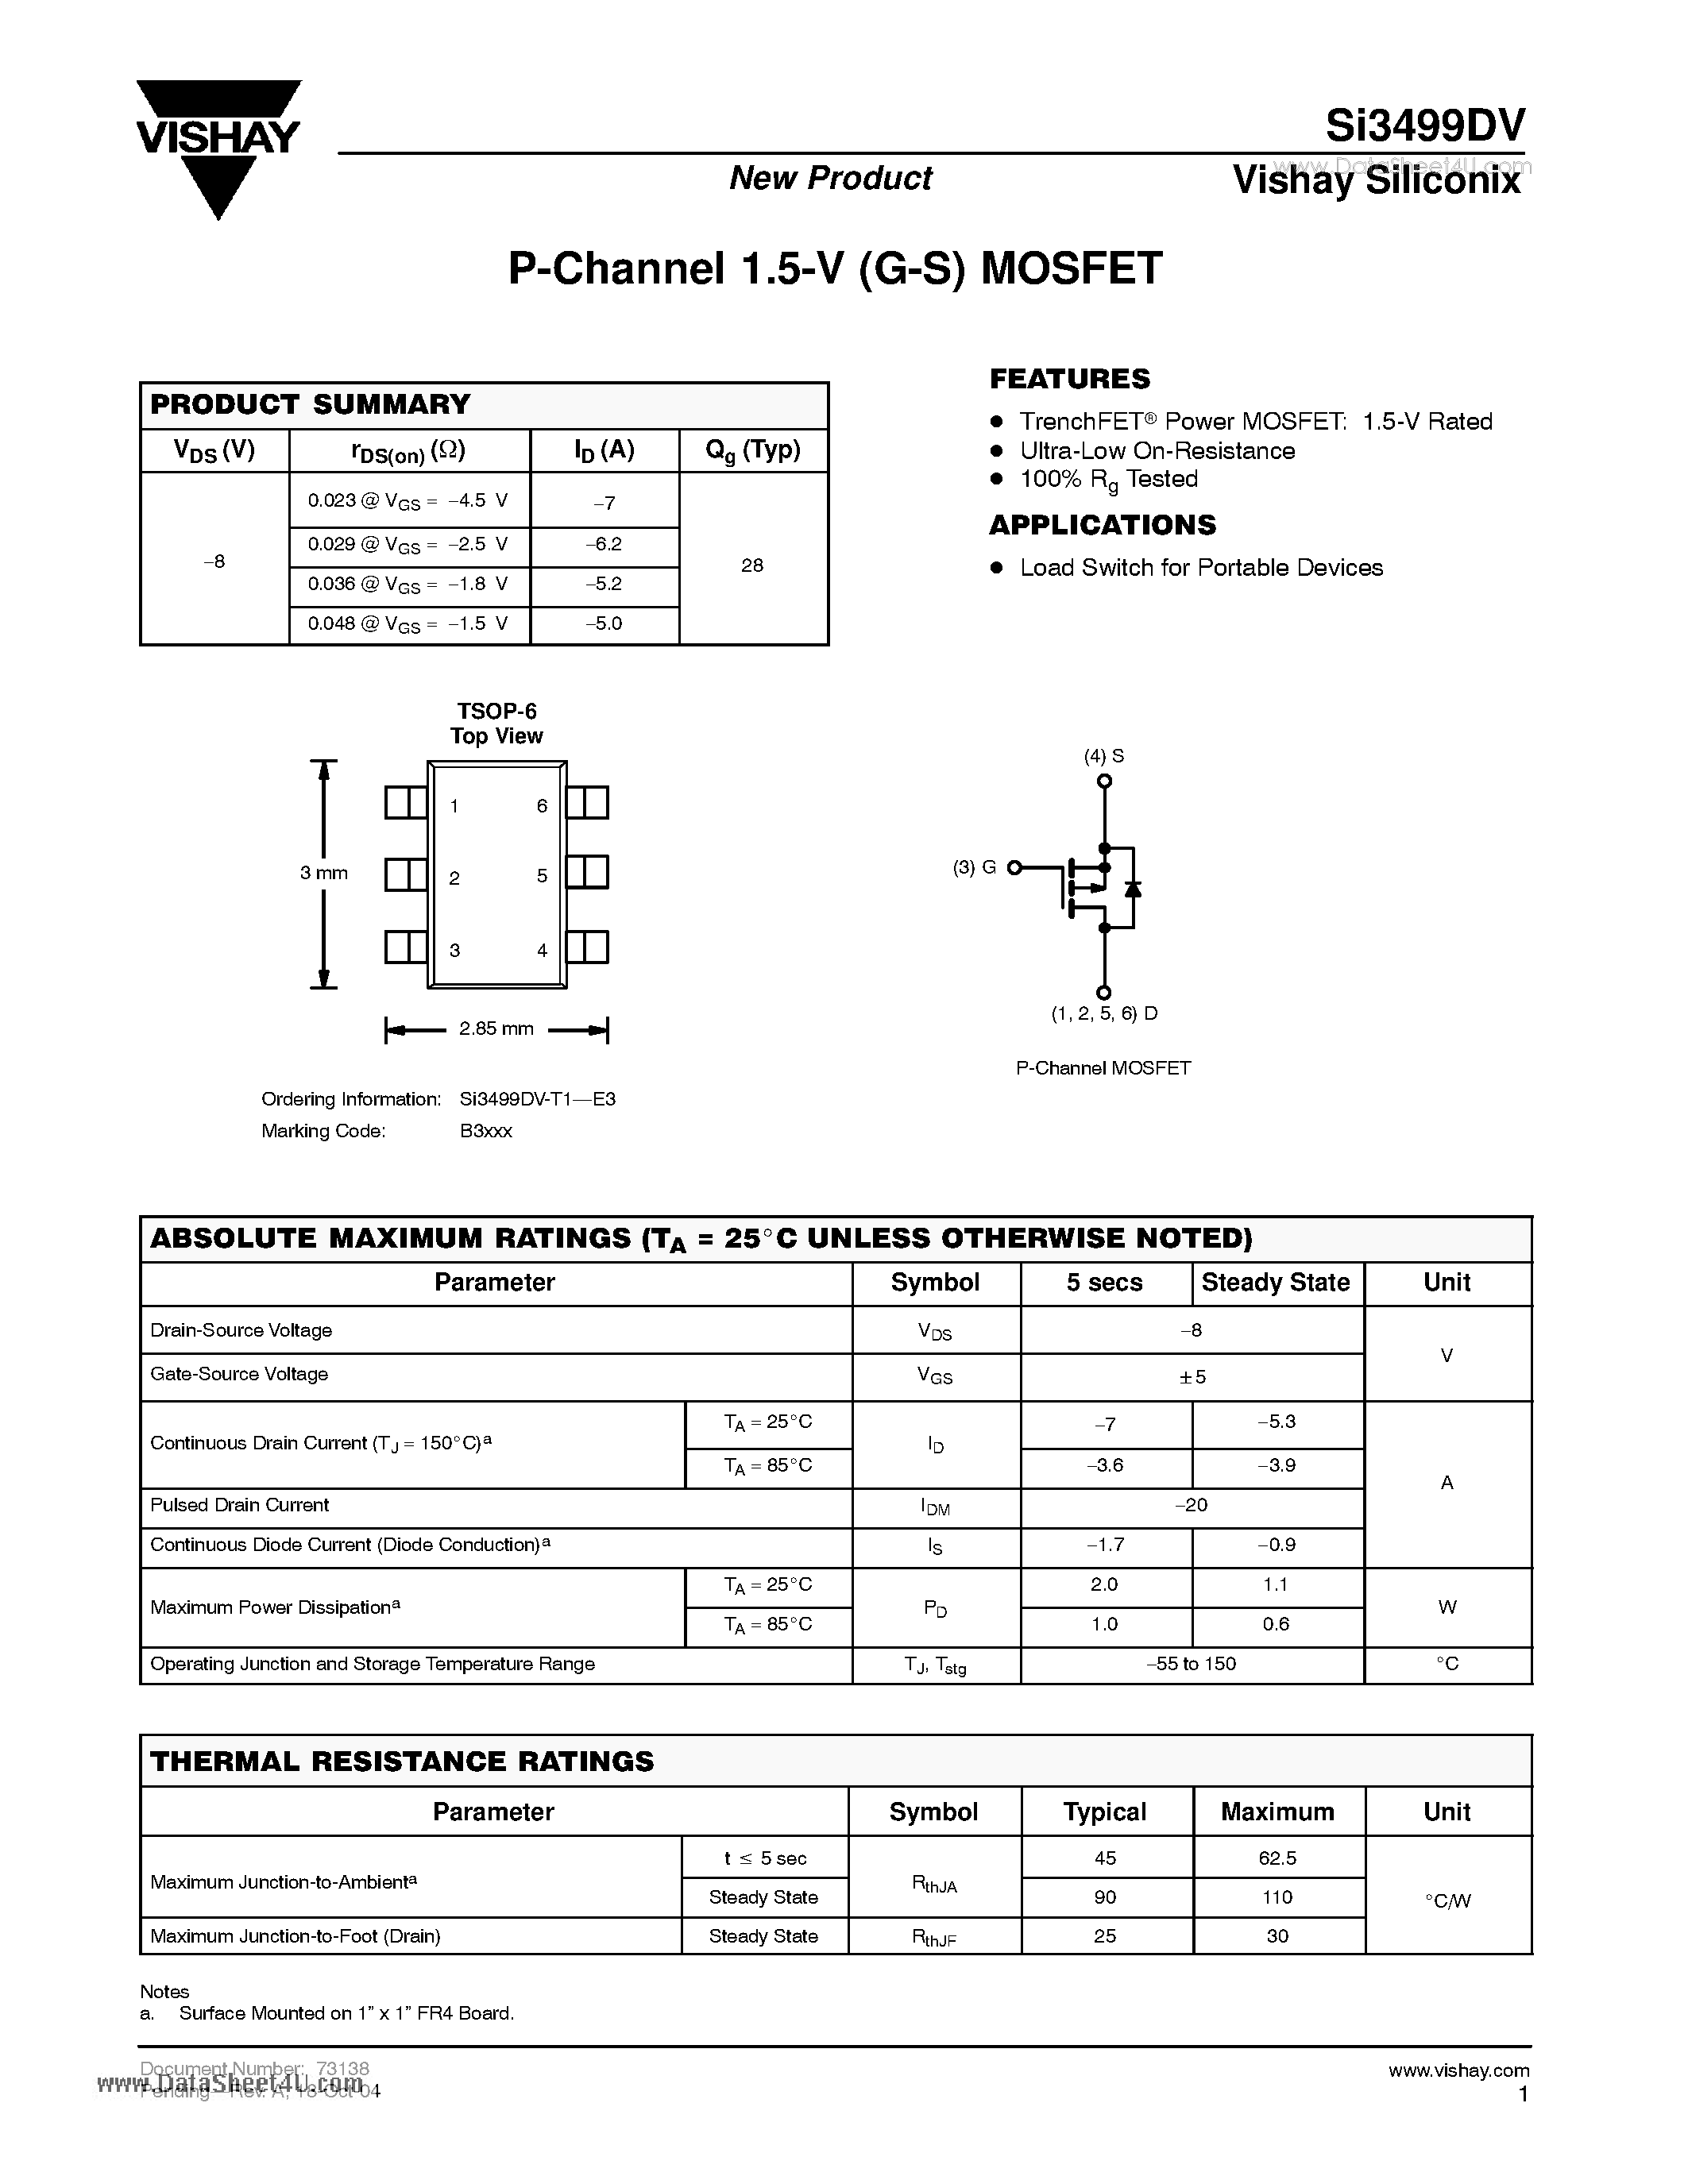 Datasheet SI3499DV - P-Channel 1.5-V (G-S) MOSFET page 1